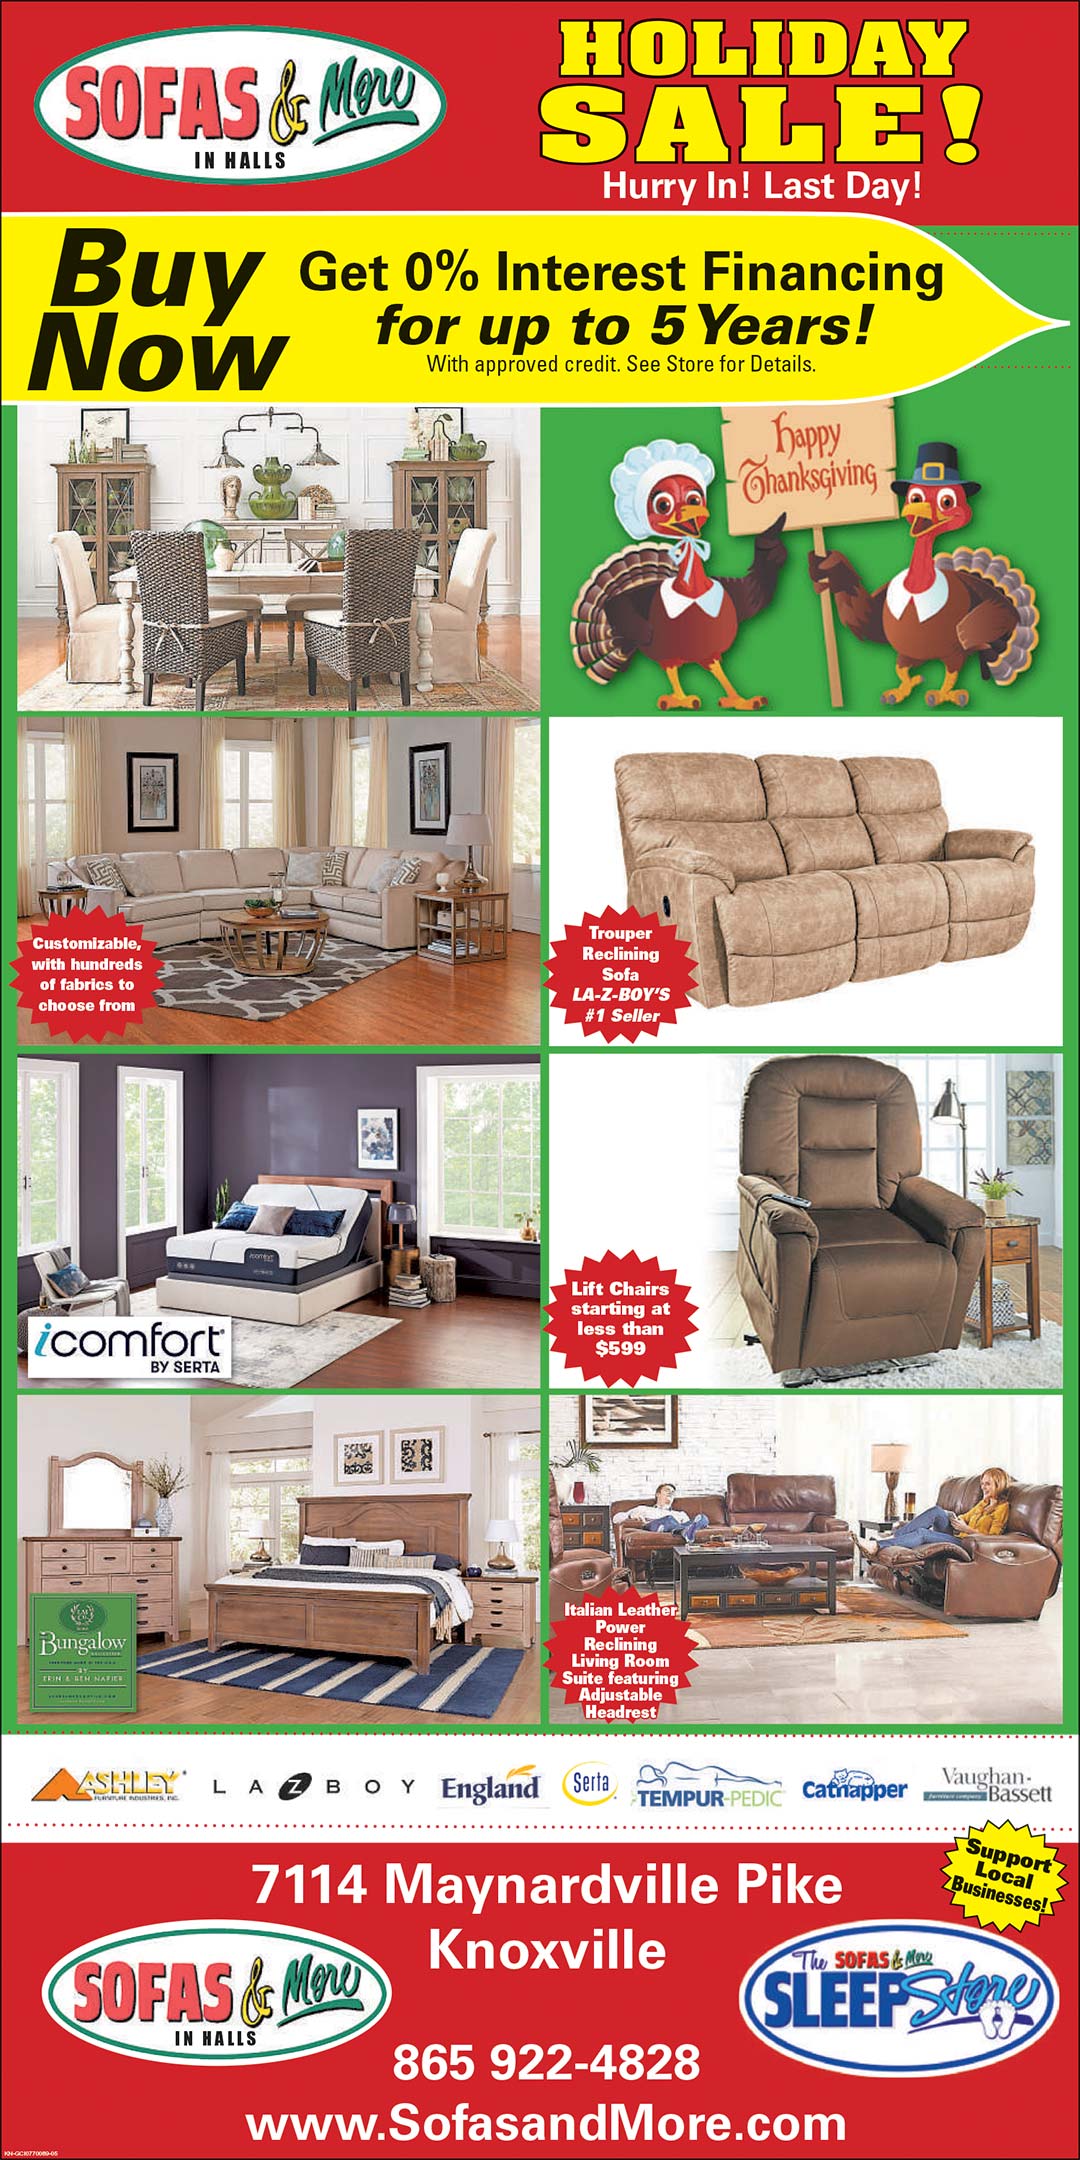 Holiday Sale 2021 Sofas & More